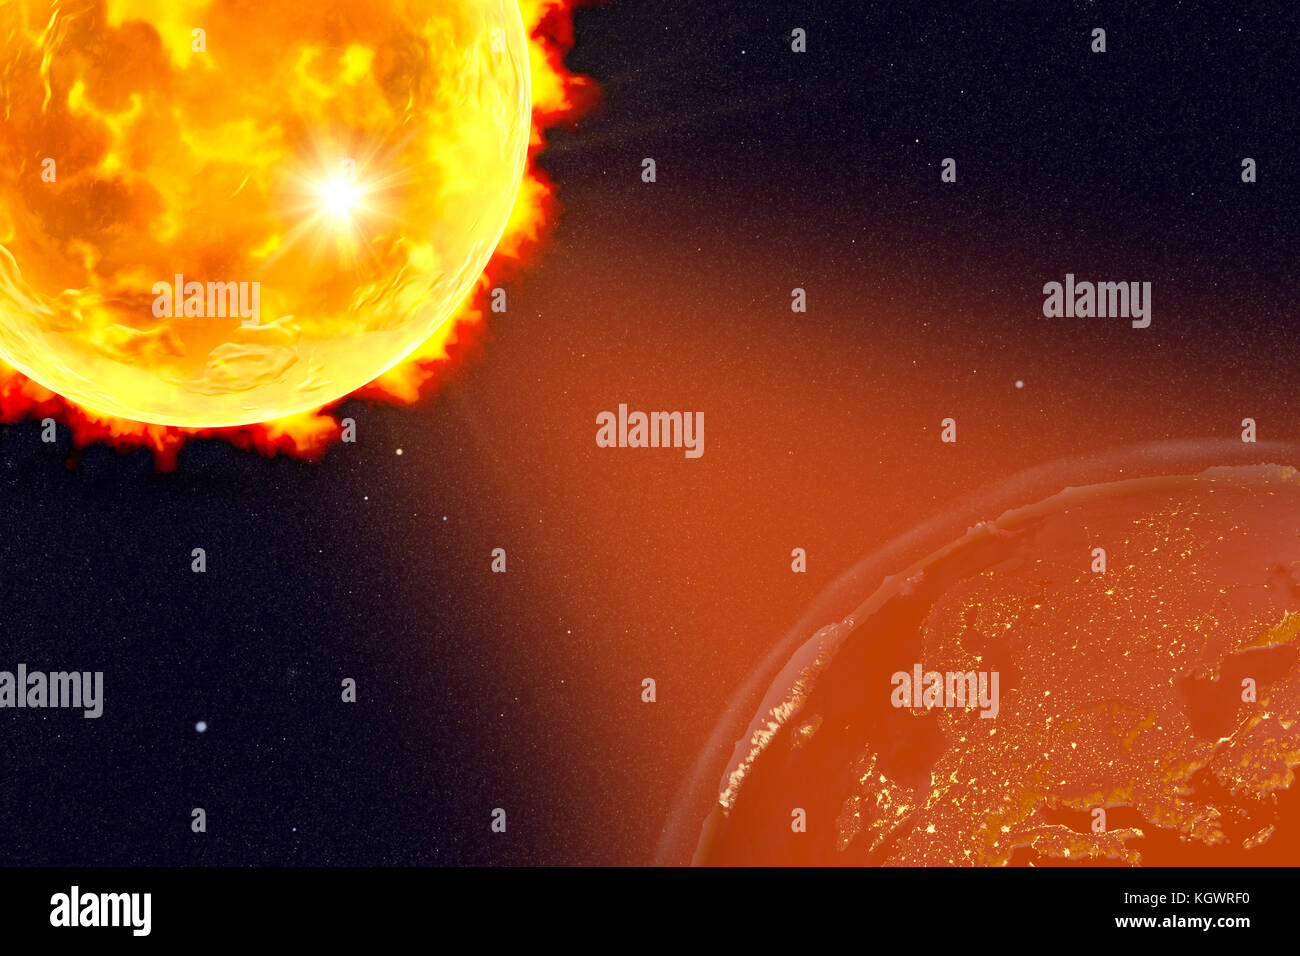 Computer illustration showing a solar flare hitting Earth. Elements of this image furnished by NASA. Stock Photo